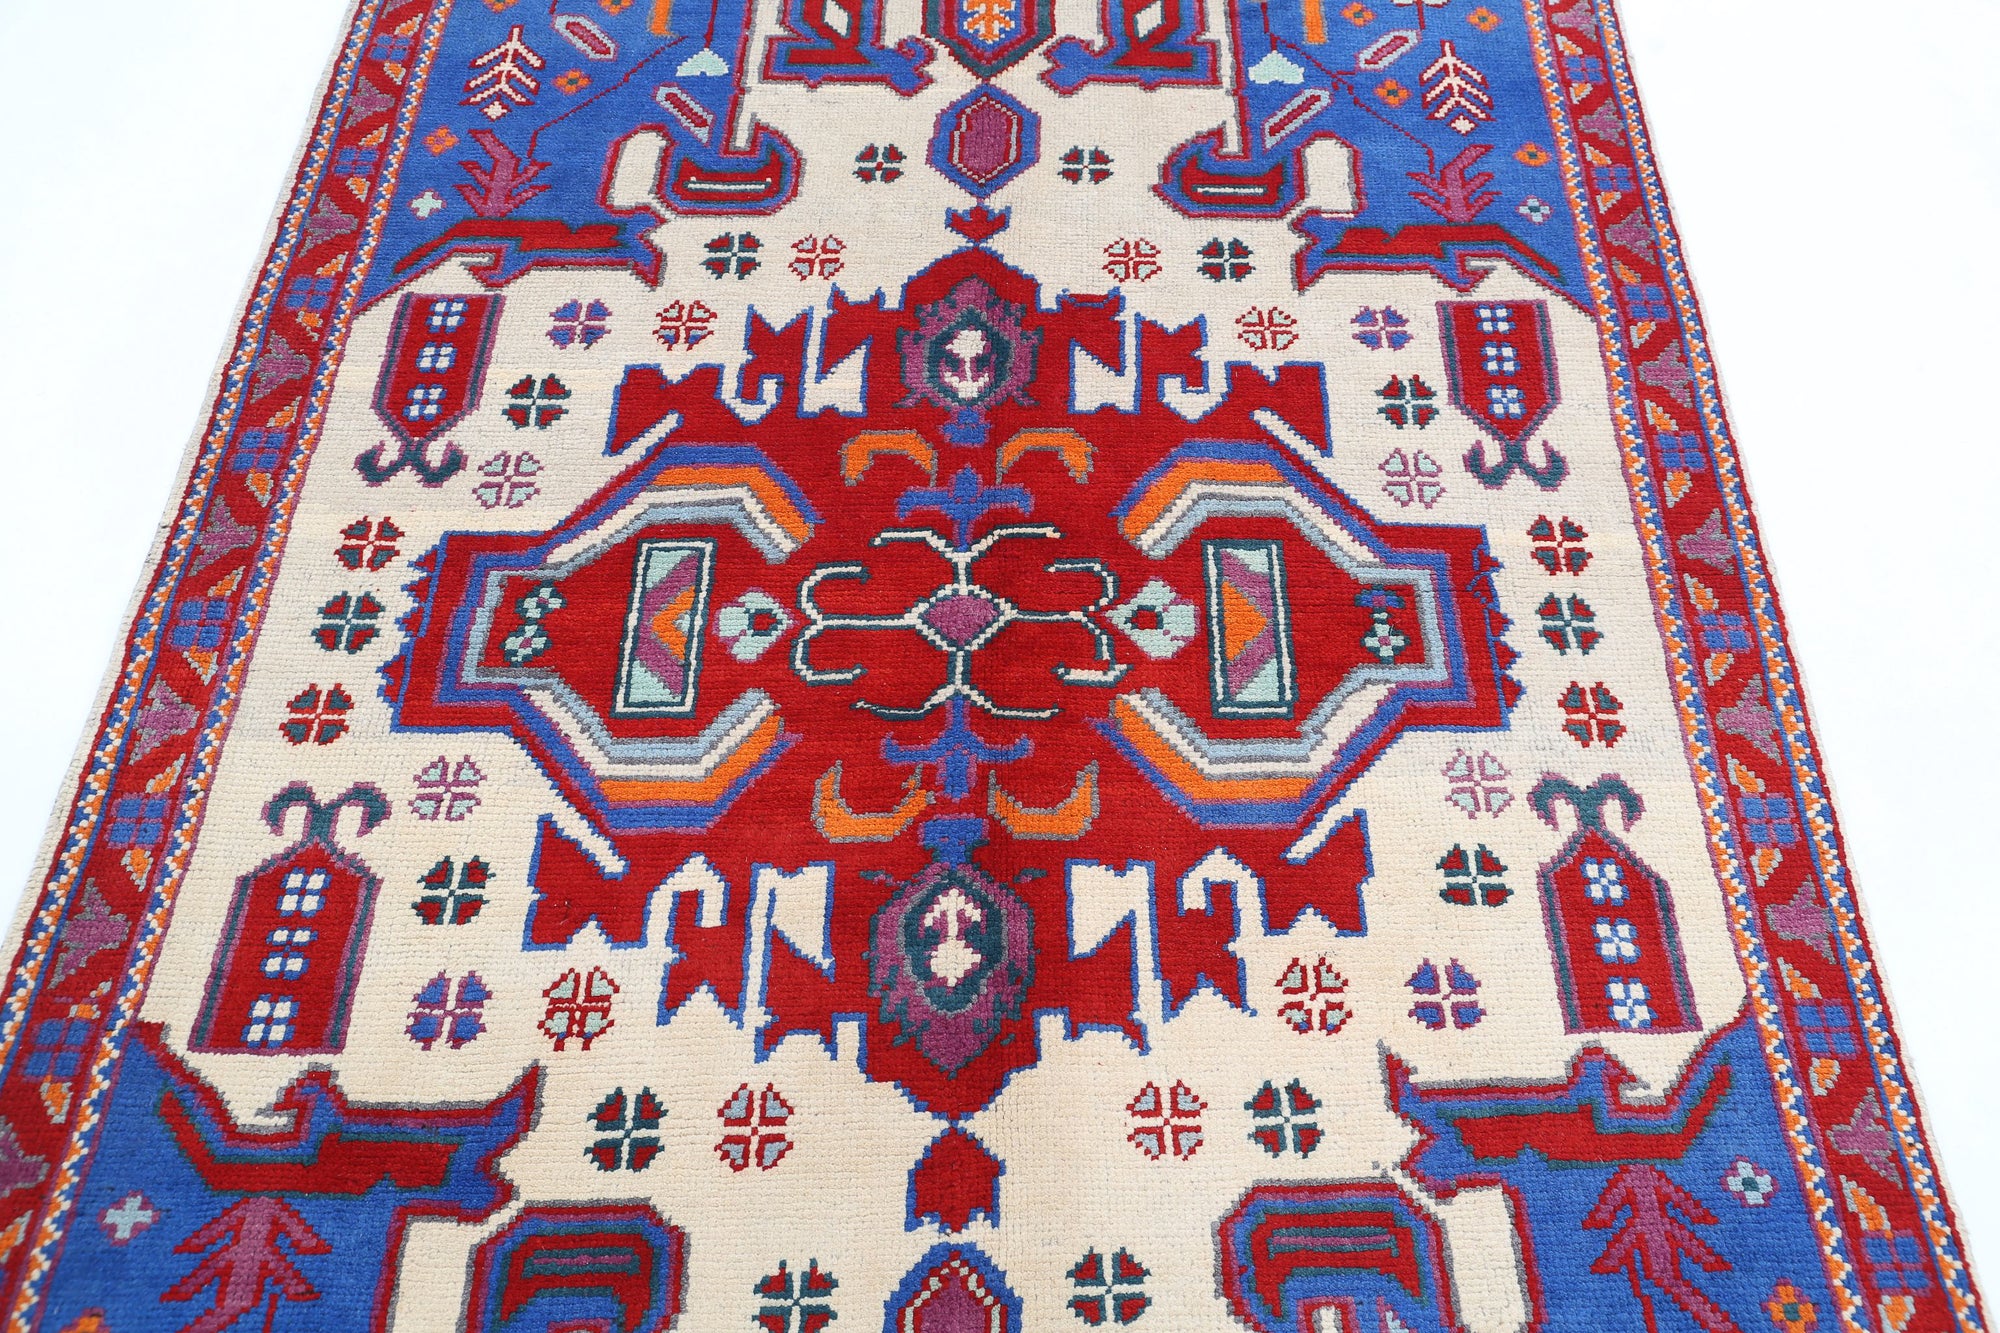 Revival-hand-knotted-qarghani-wool-rug-5014094-4.jpg